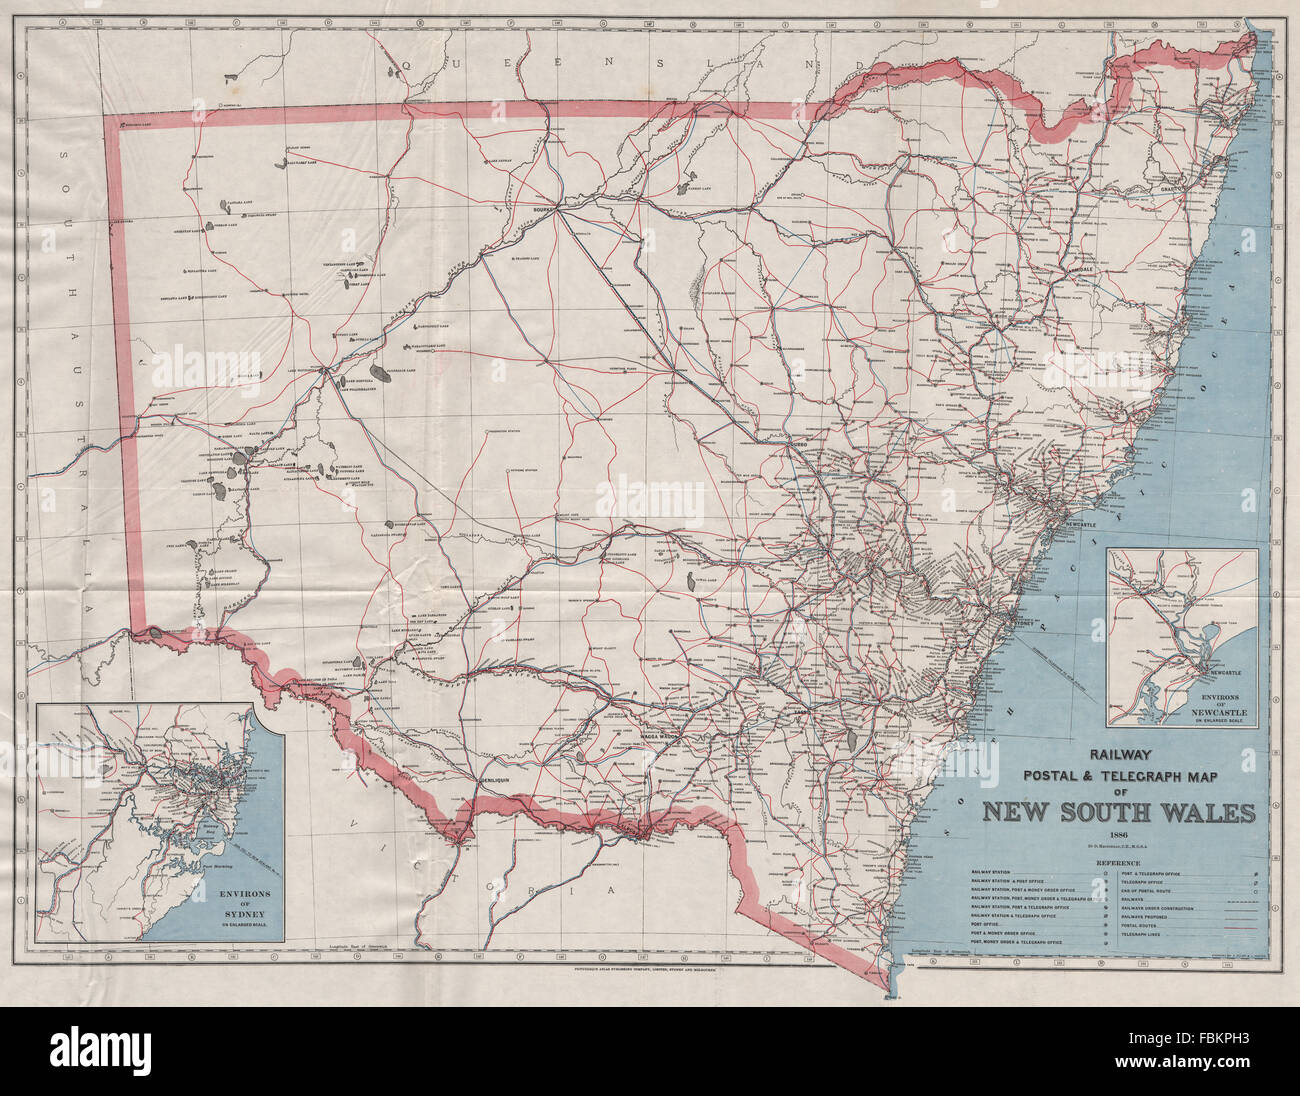 NEW SOUTH WALES. Railway Post Telegraph routes offices 1886. MACDONALD, 1888 map Stock Photo